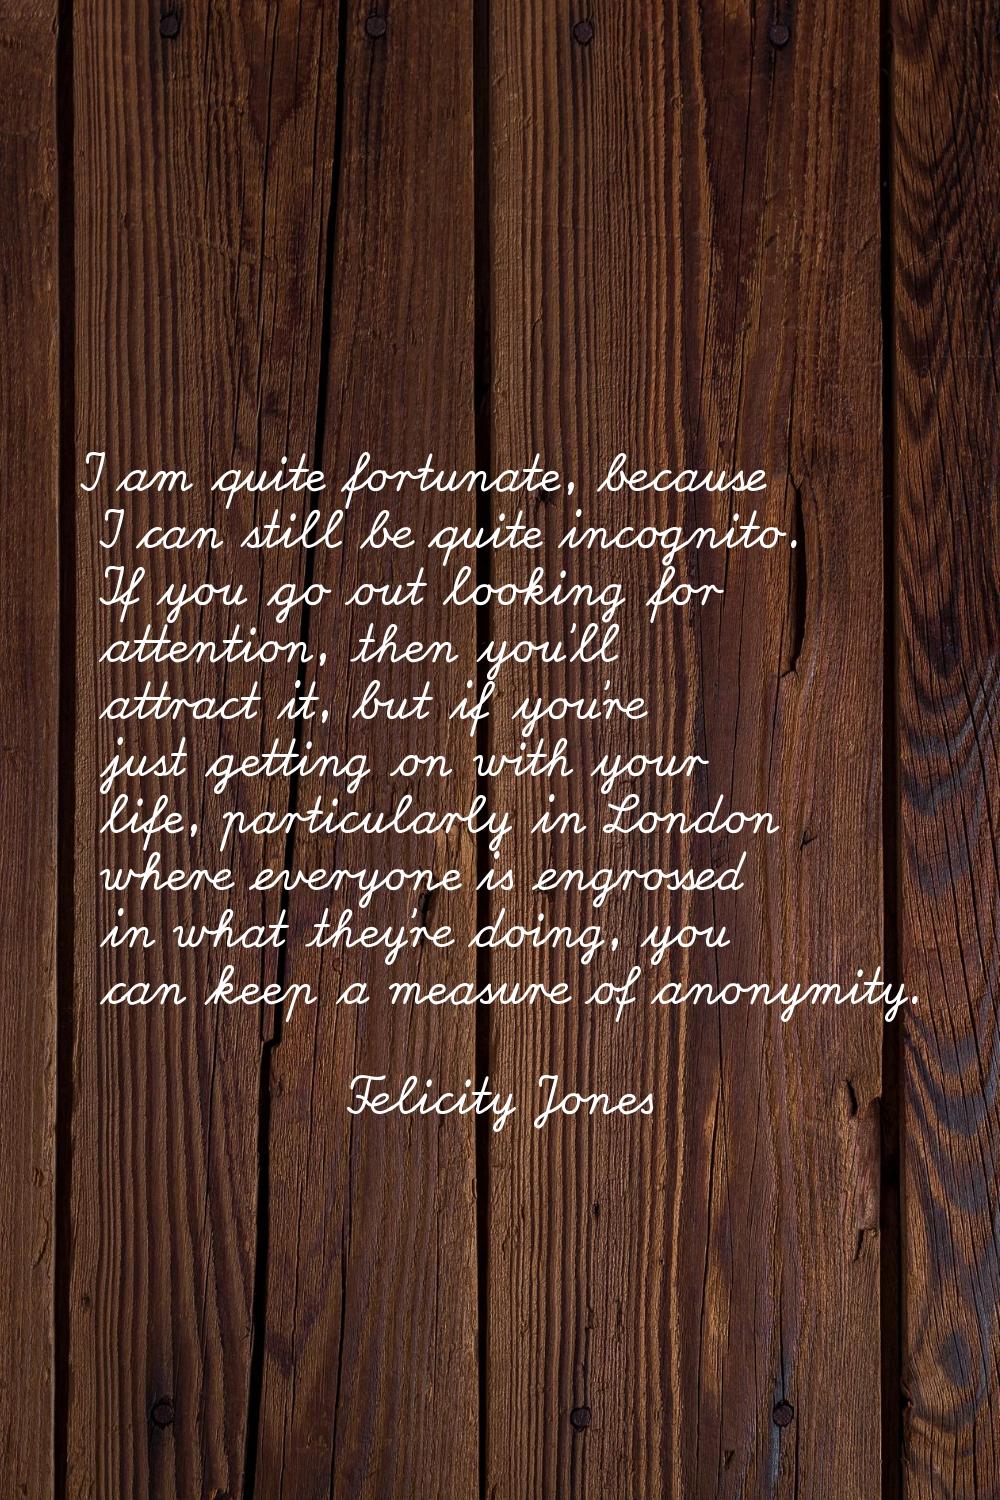 I am quite fortunate, because I can still be quite incognito. If you go out looking for attention, 